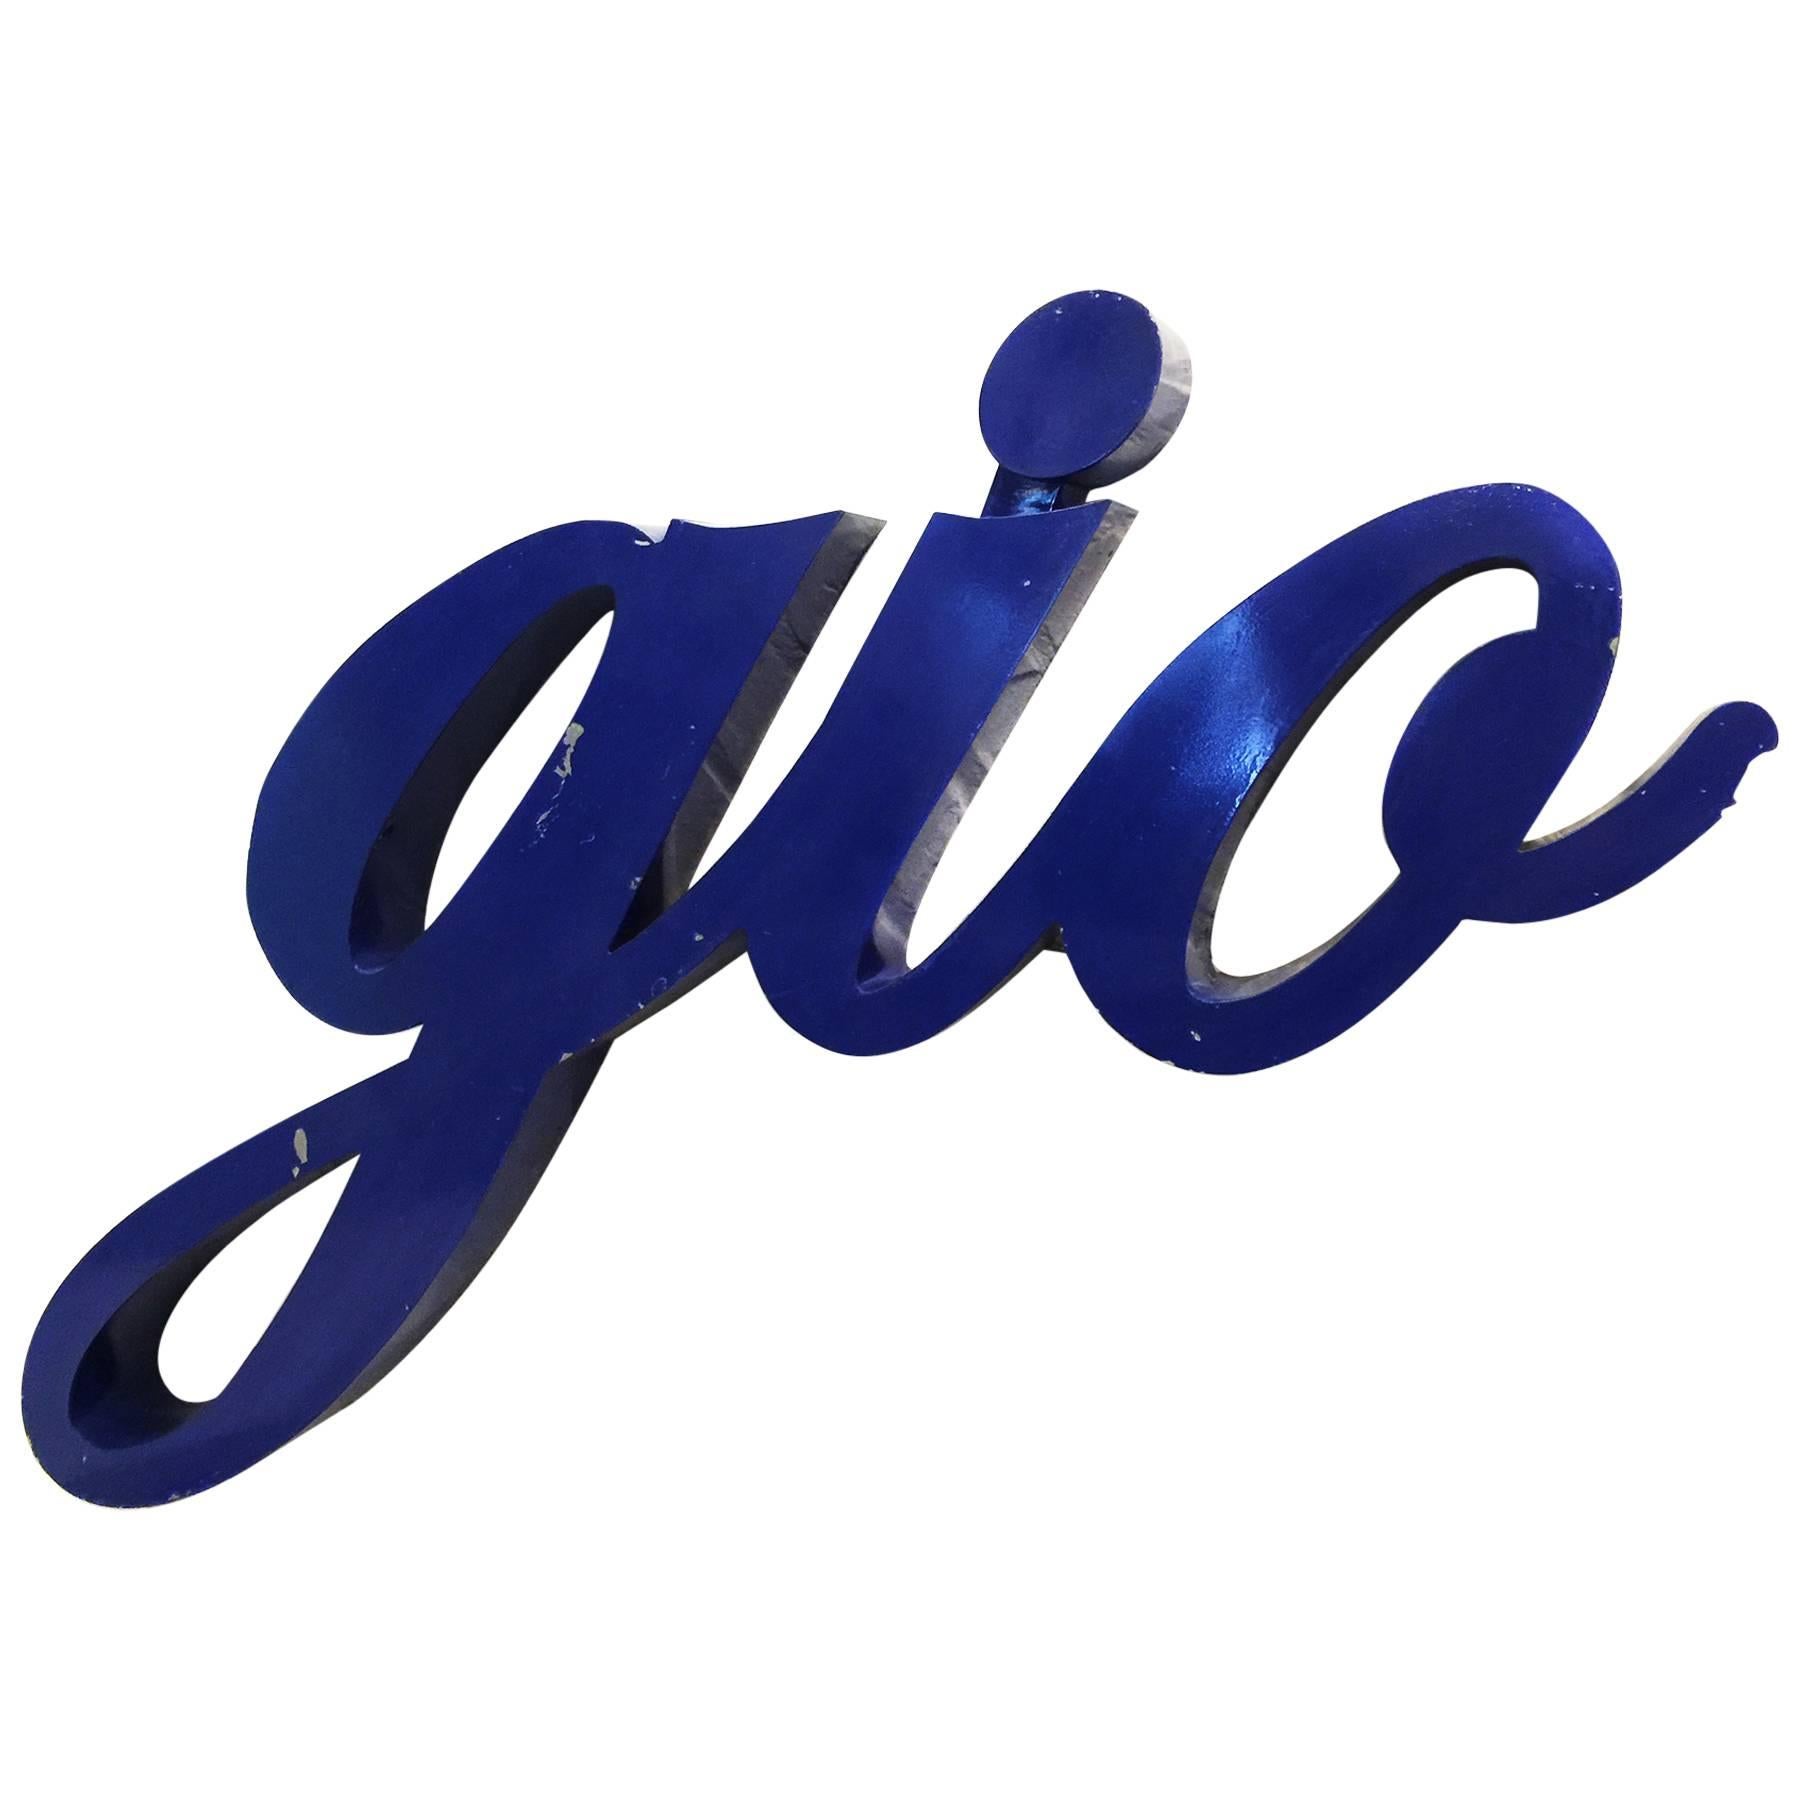 Vintage Aluminum Channel Letter "Gio" Sign